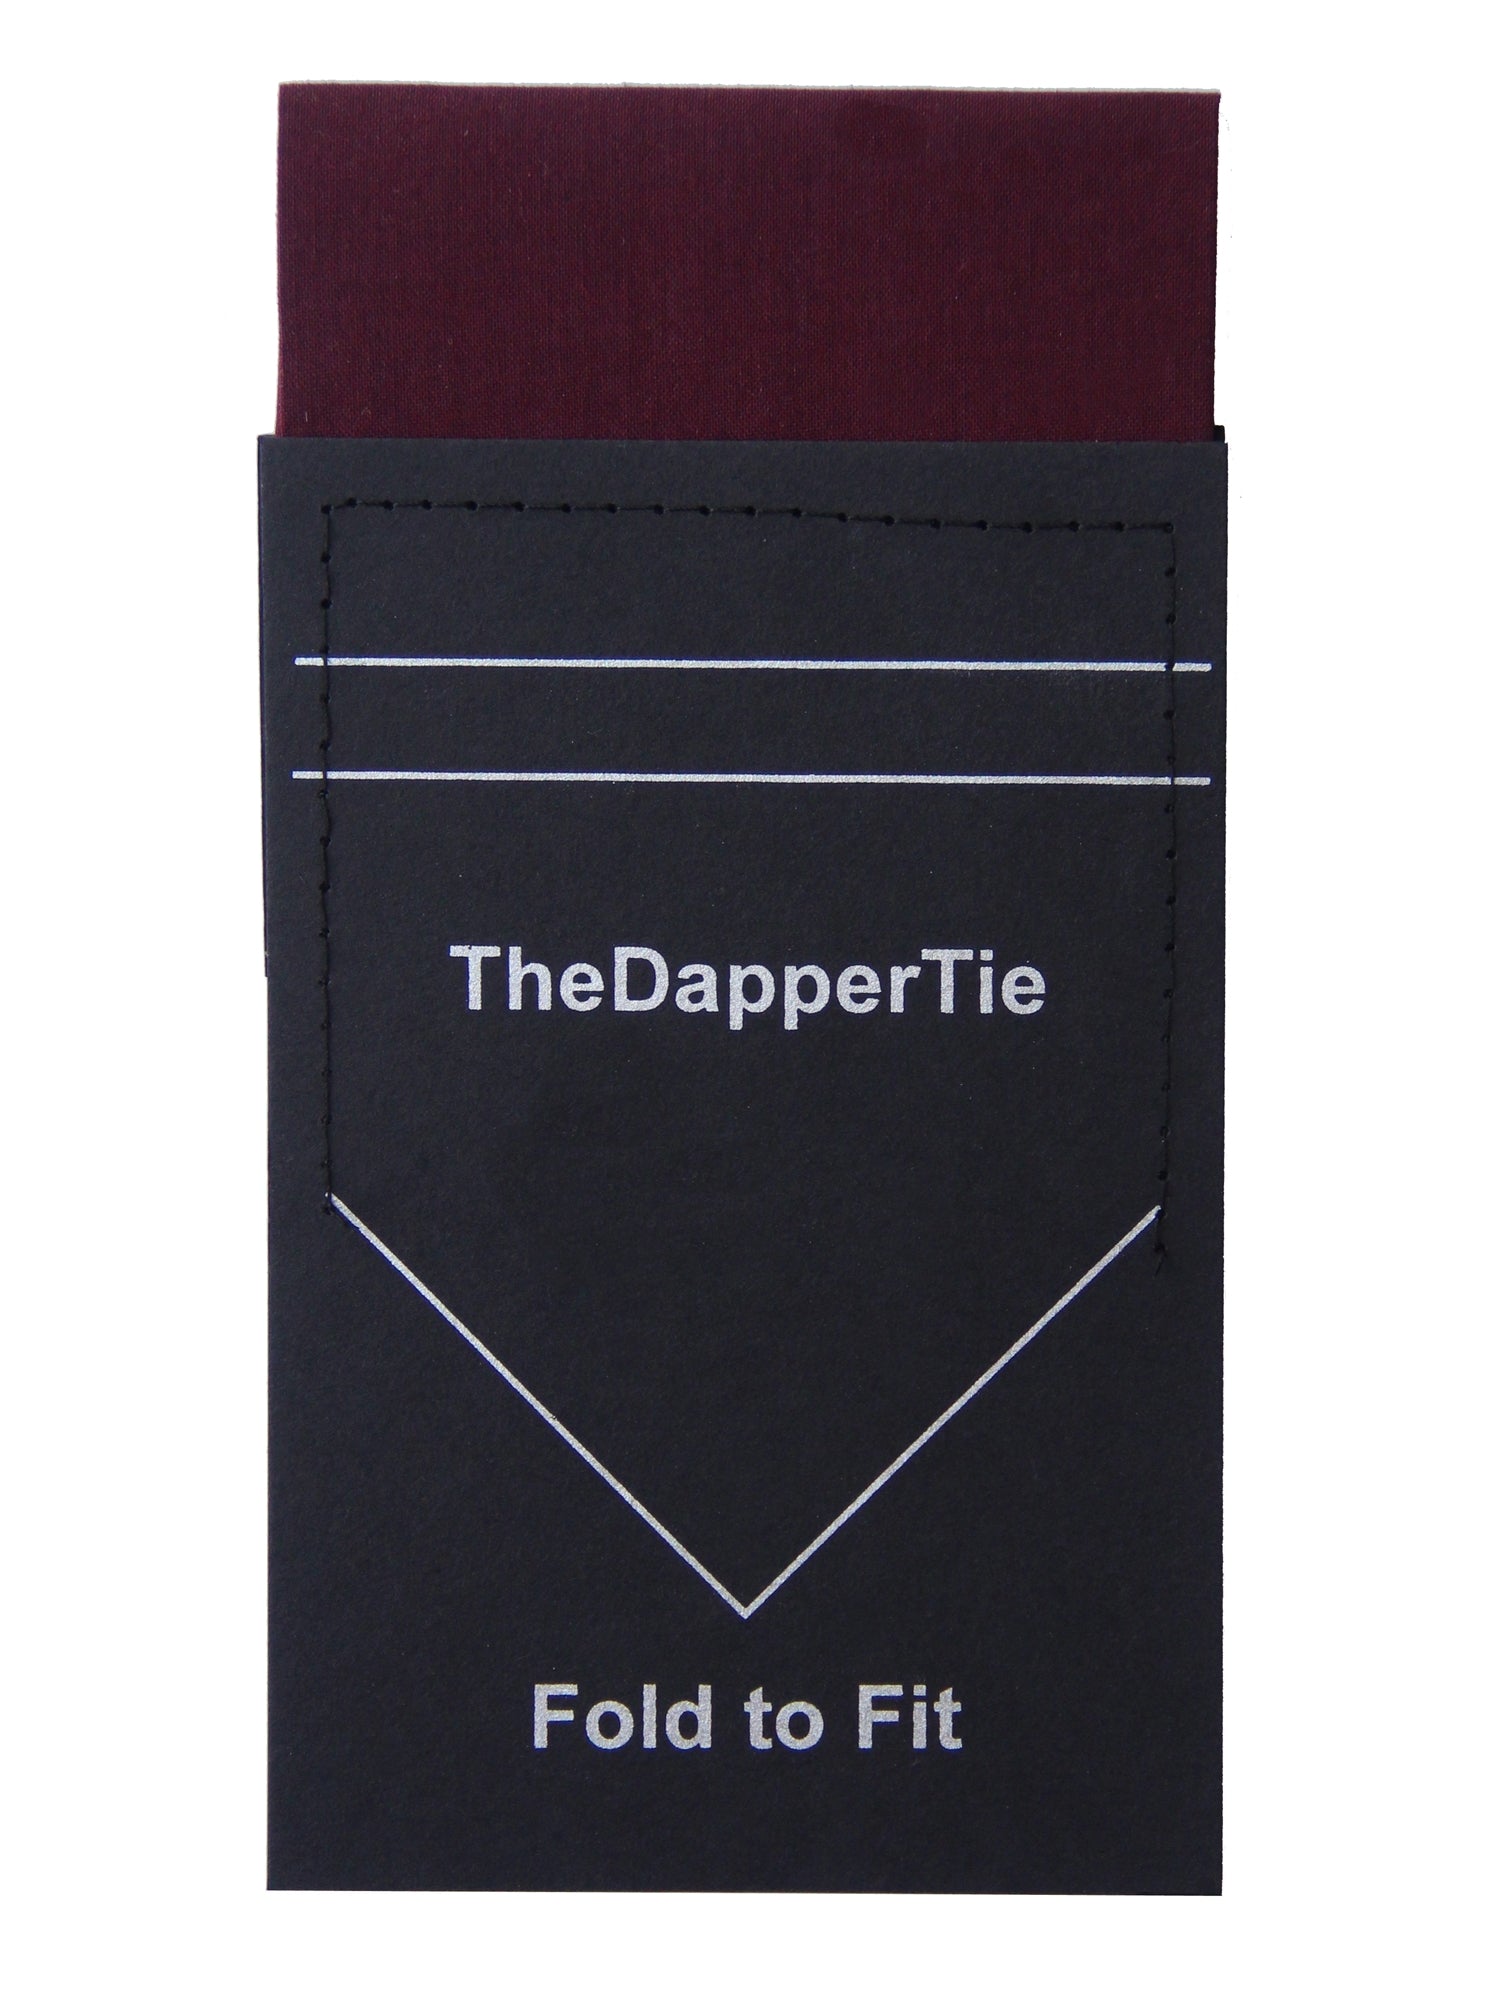 TheDapperTie - Men's Extra Thick Cotton Flat Pre Folded Pocket Square on Card Prefolded Pocket Squares TheDapperTie Burgundy Regular 